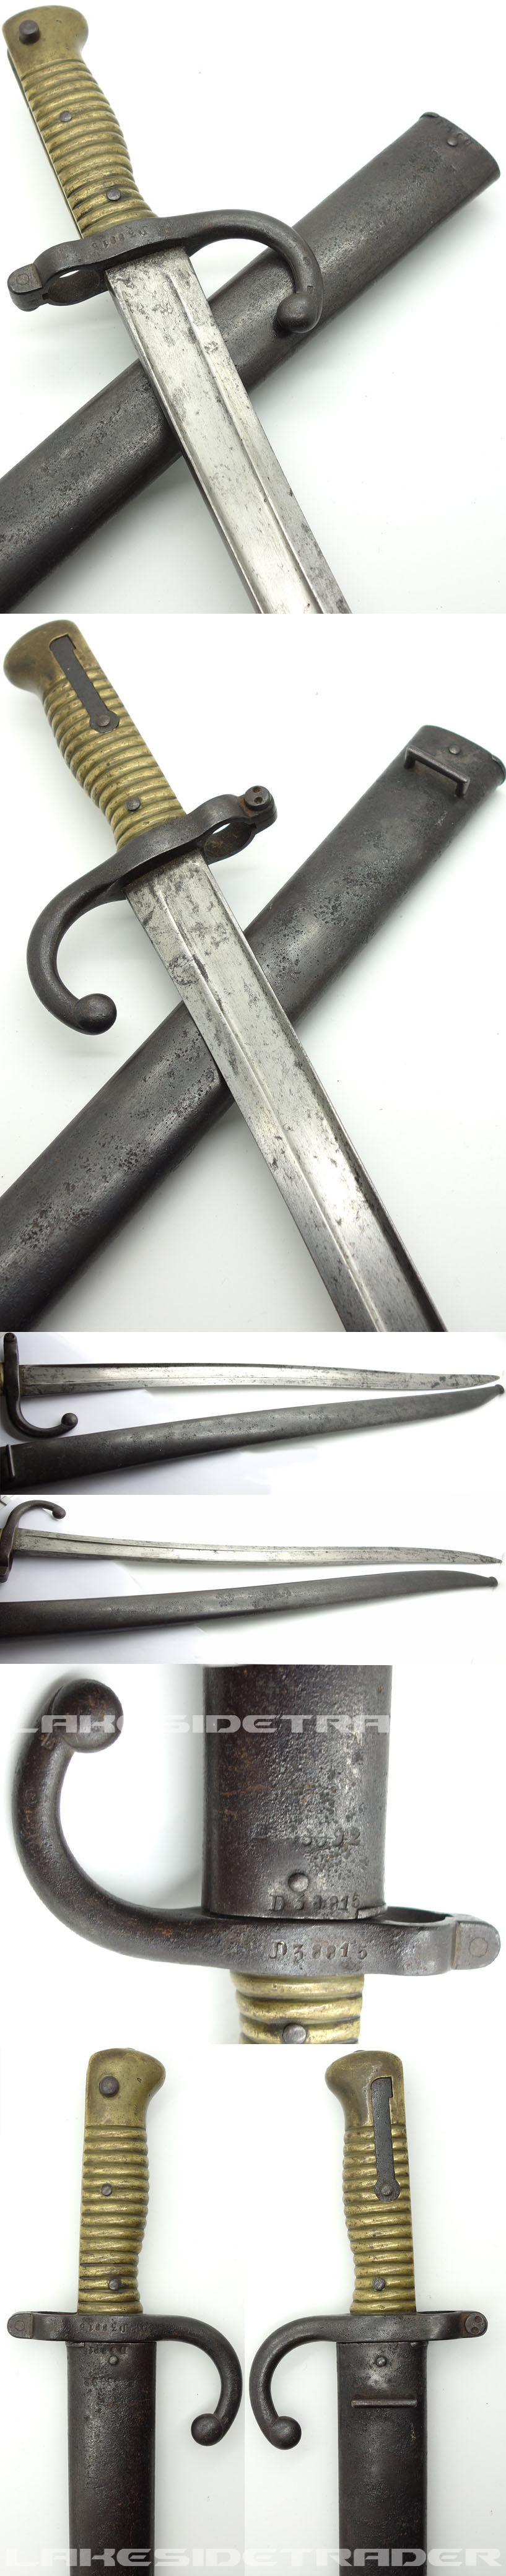 French Mle. 1866 Chassepot Naval Sword Bayonet